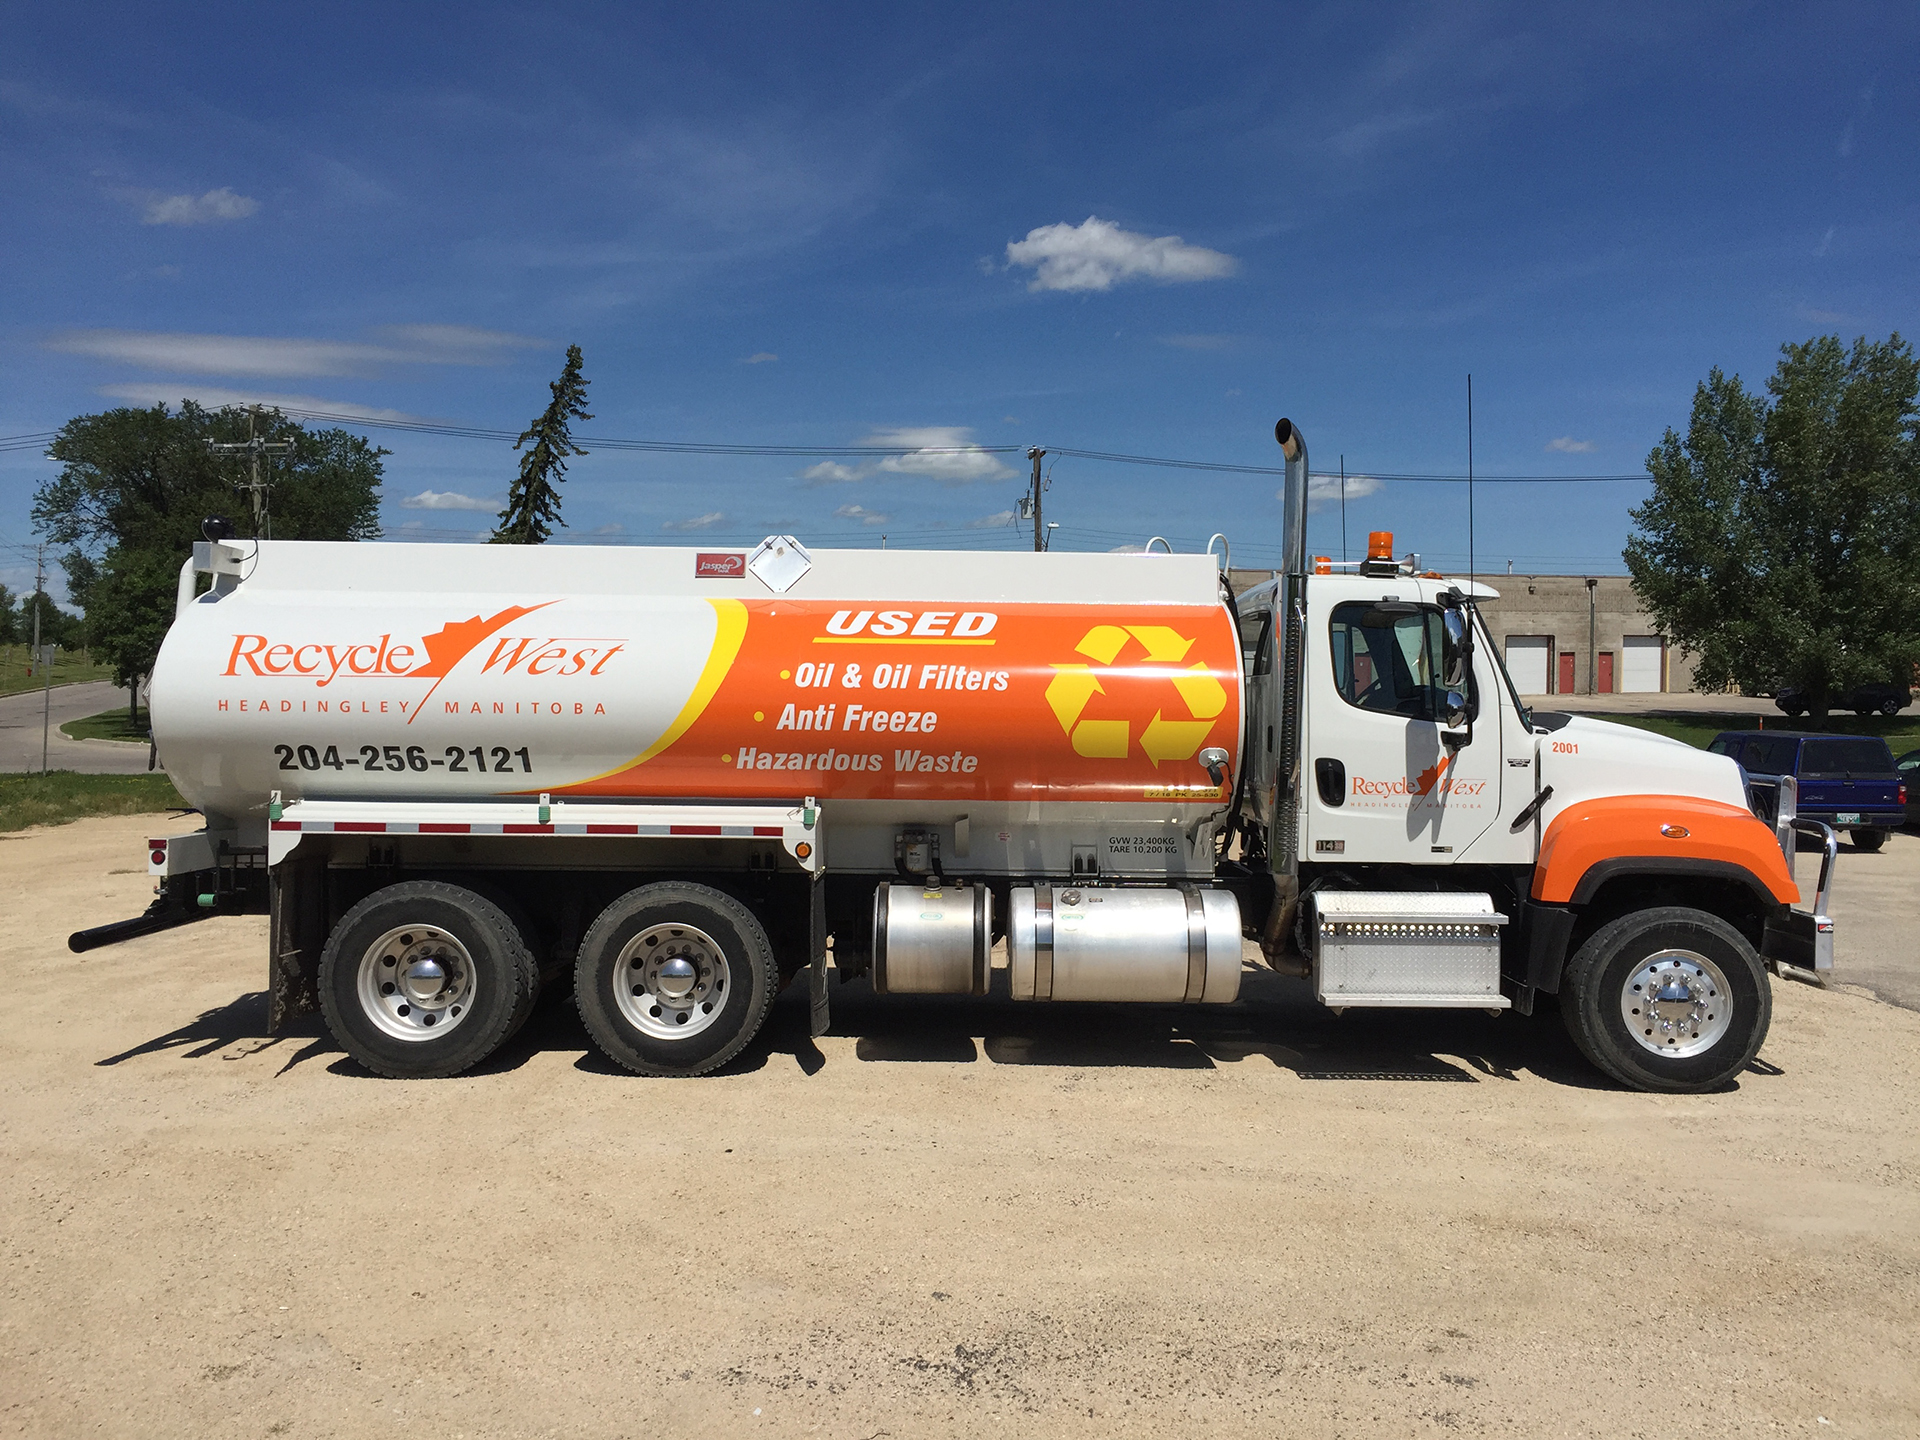 Vac truck services in Edmonton by Recycle West